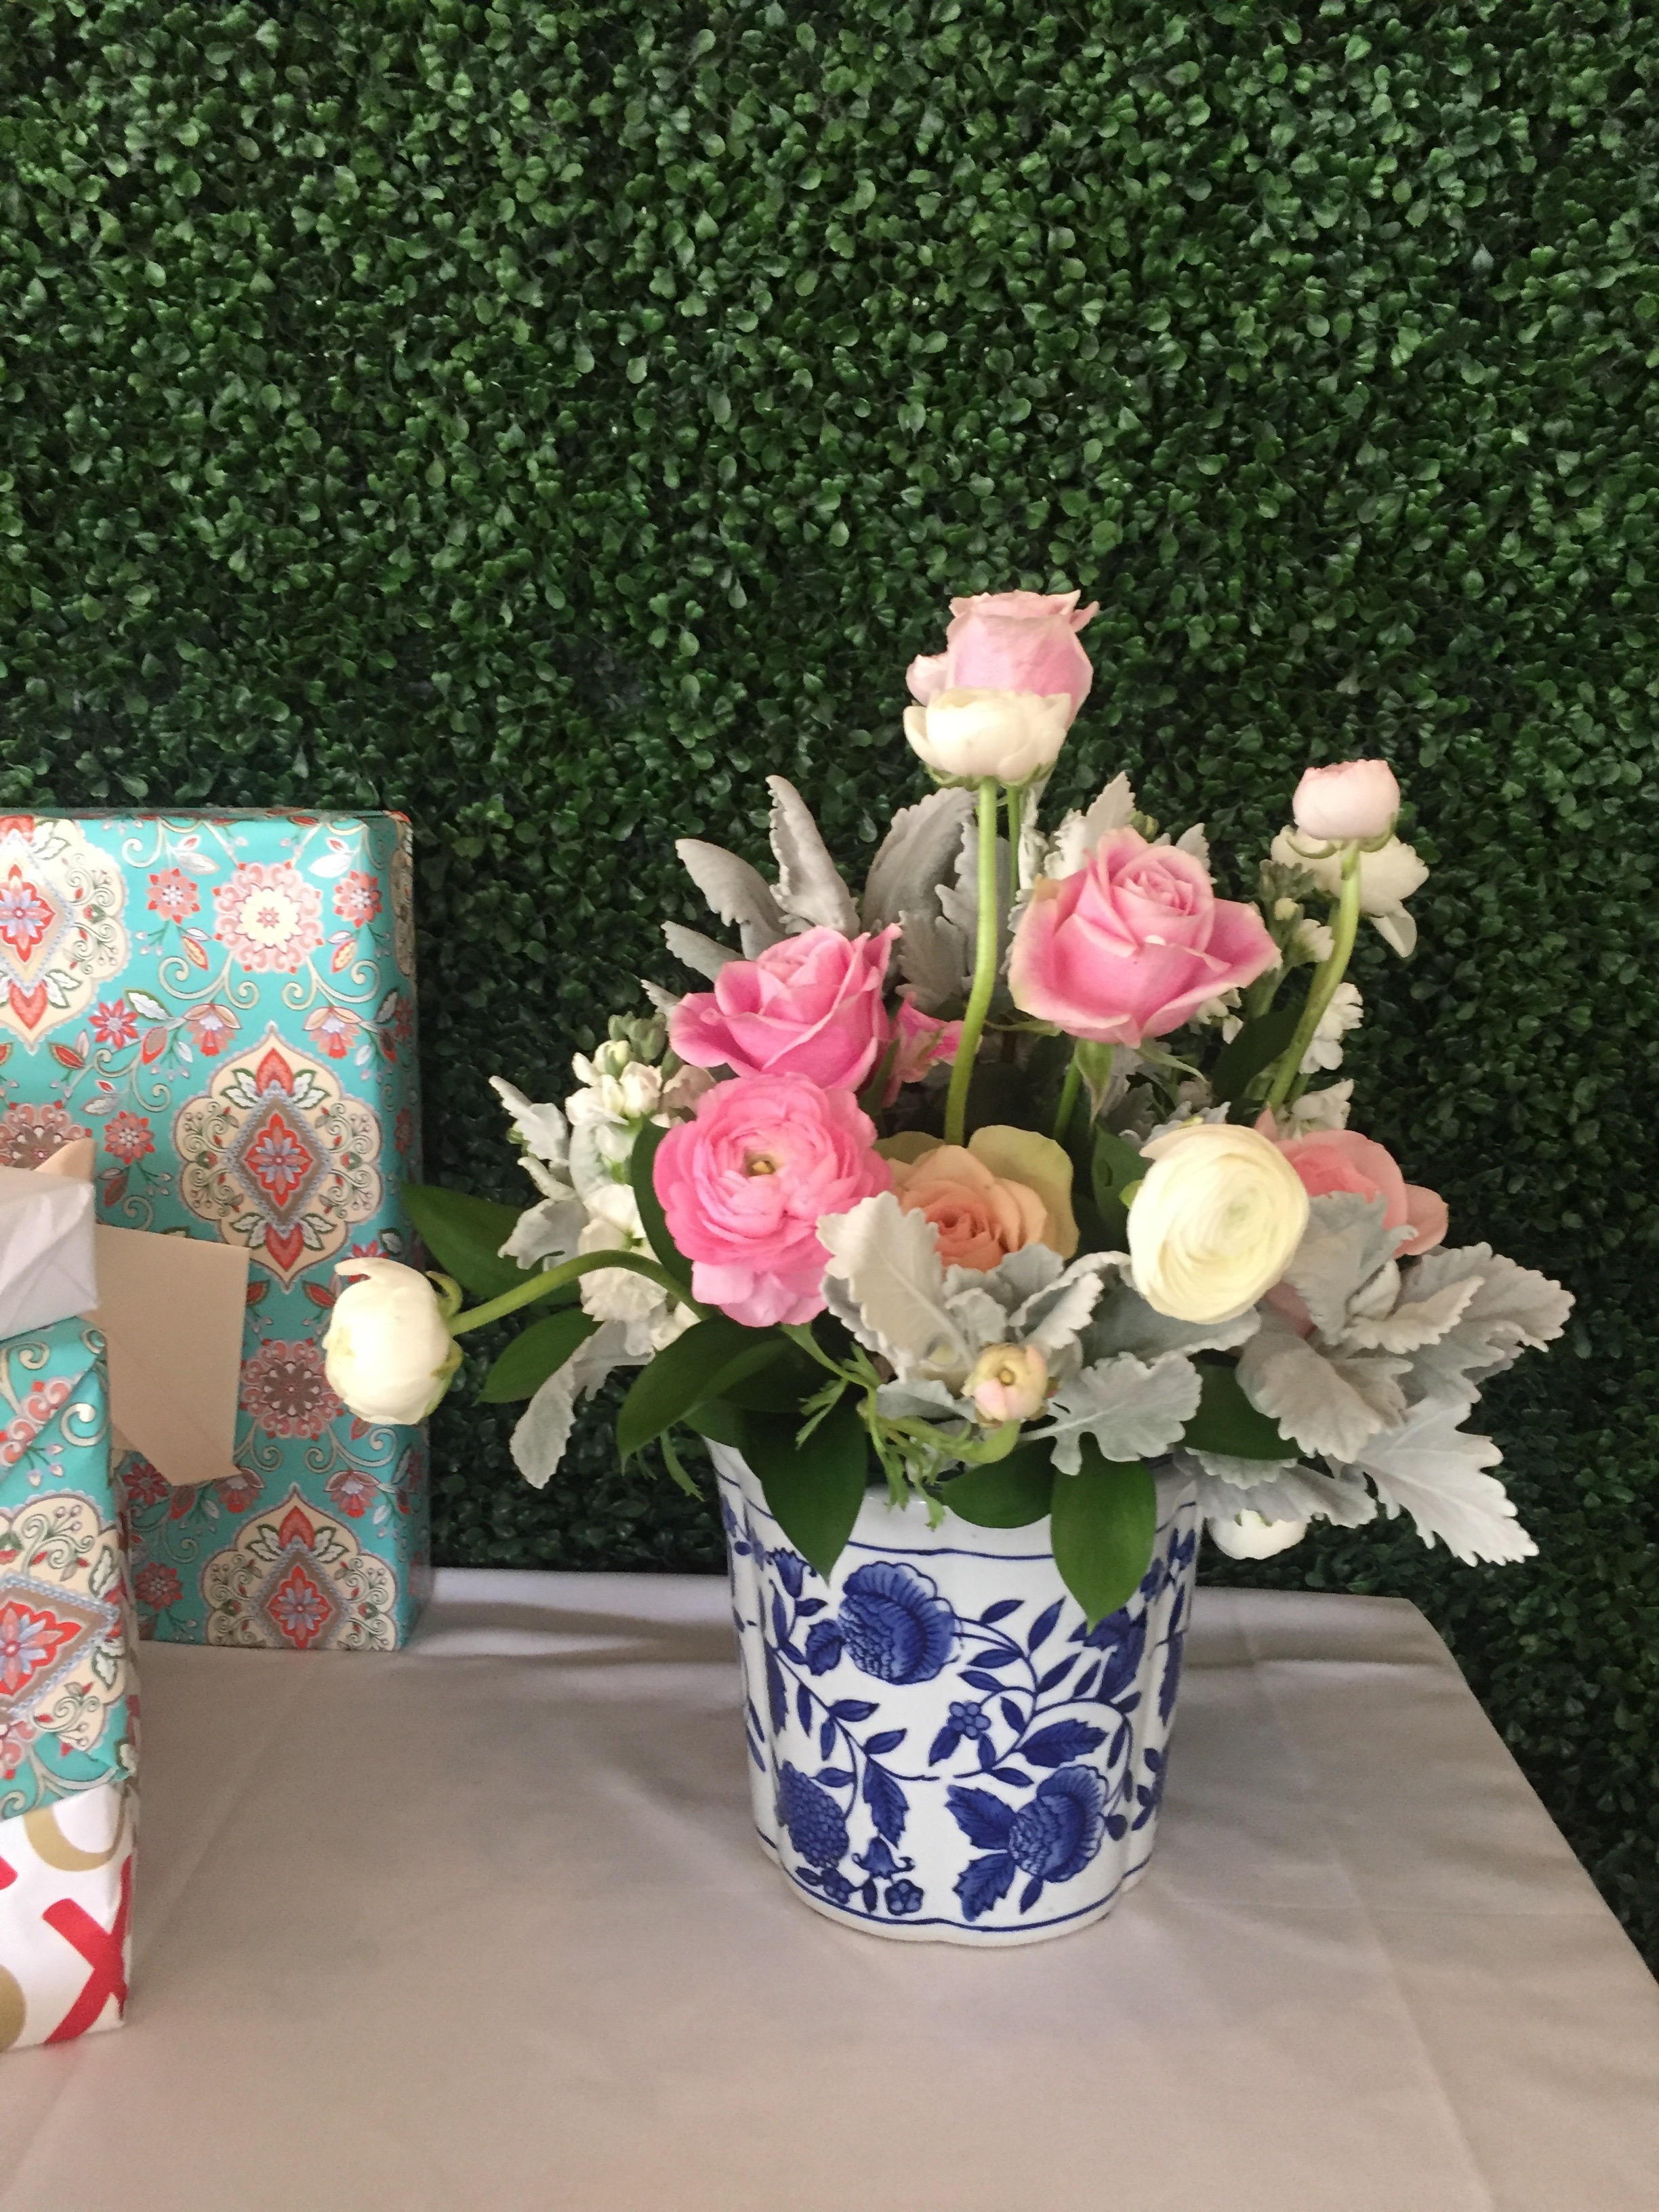 Bridal Shower by Christina Dandar for The Potted Boxwood 17